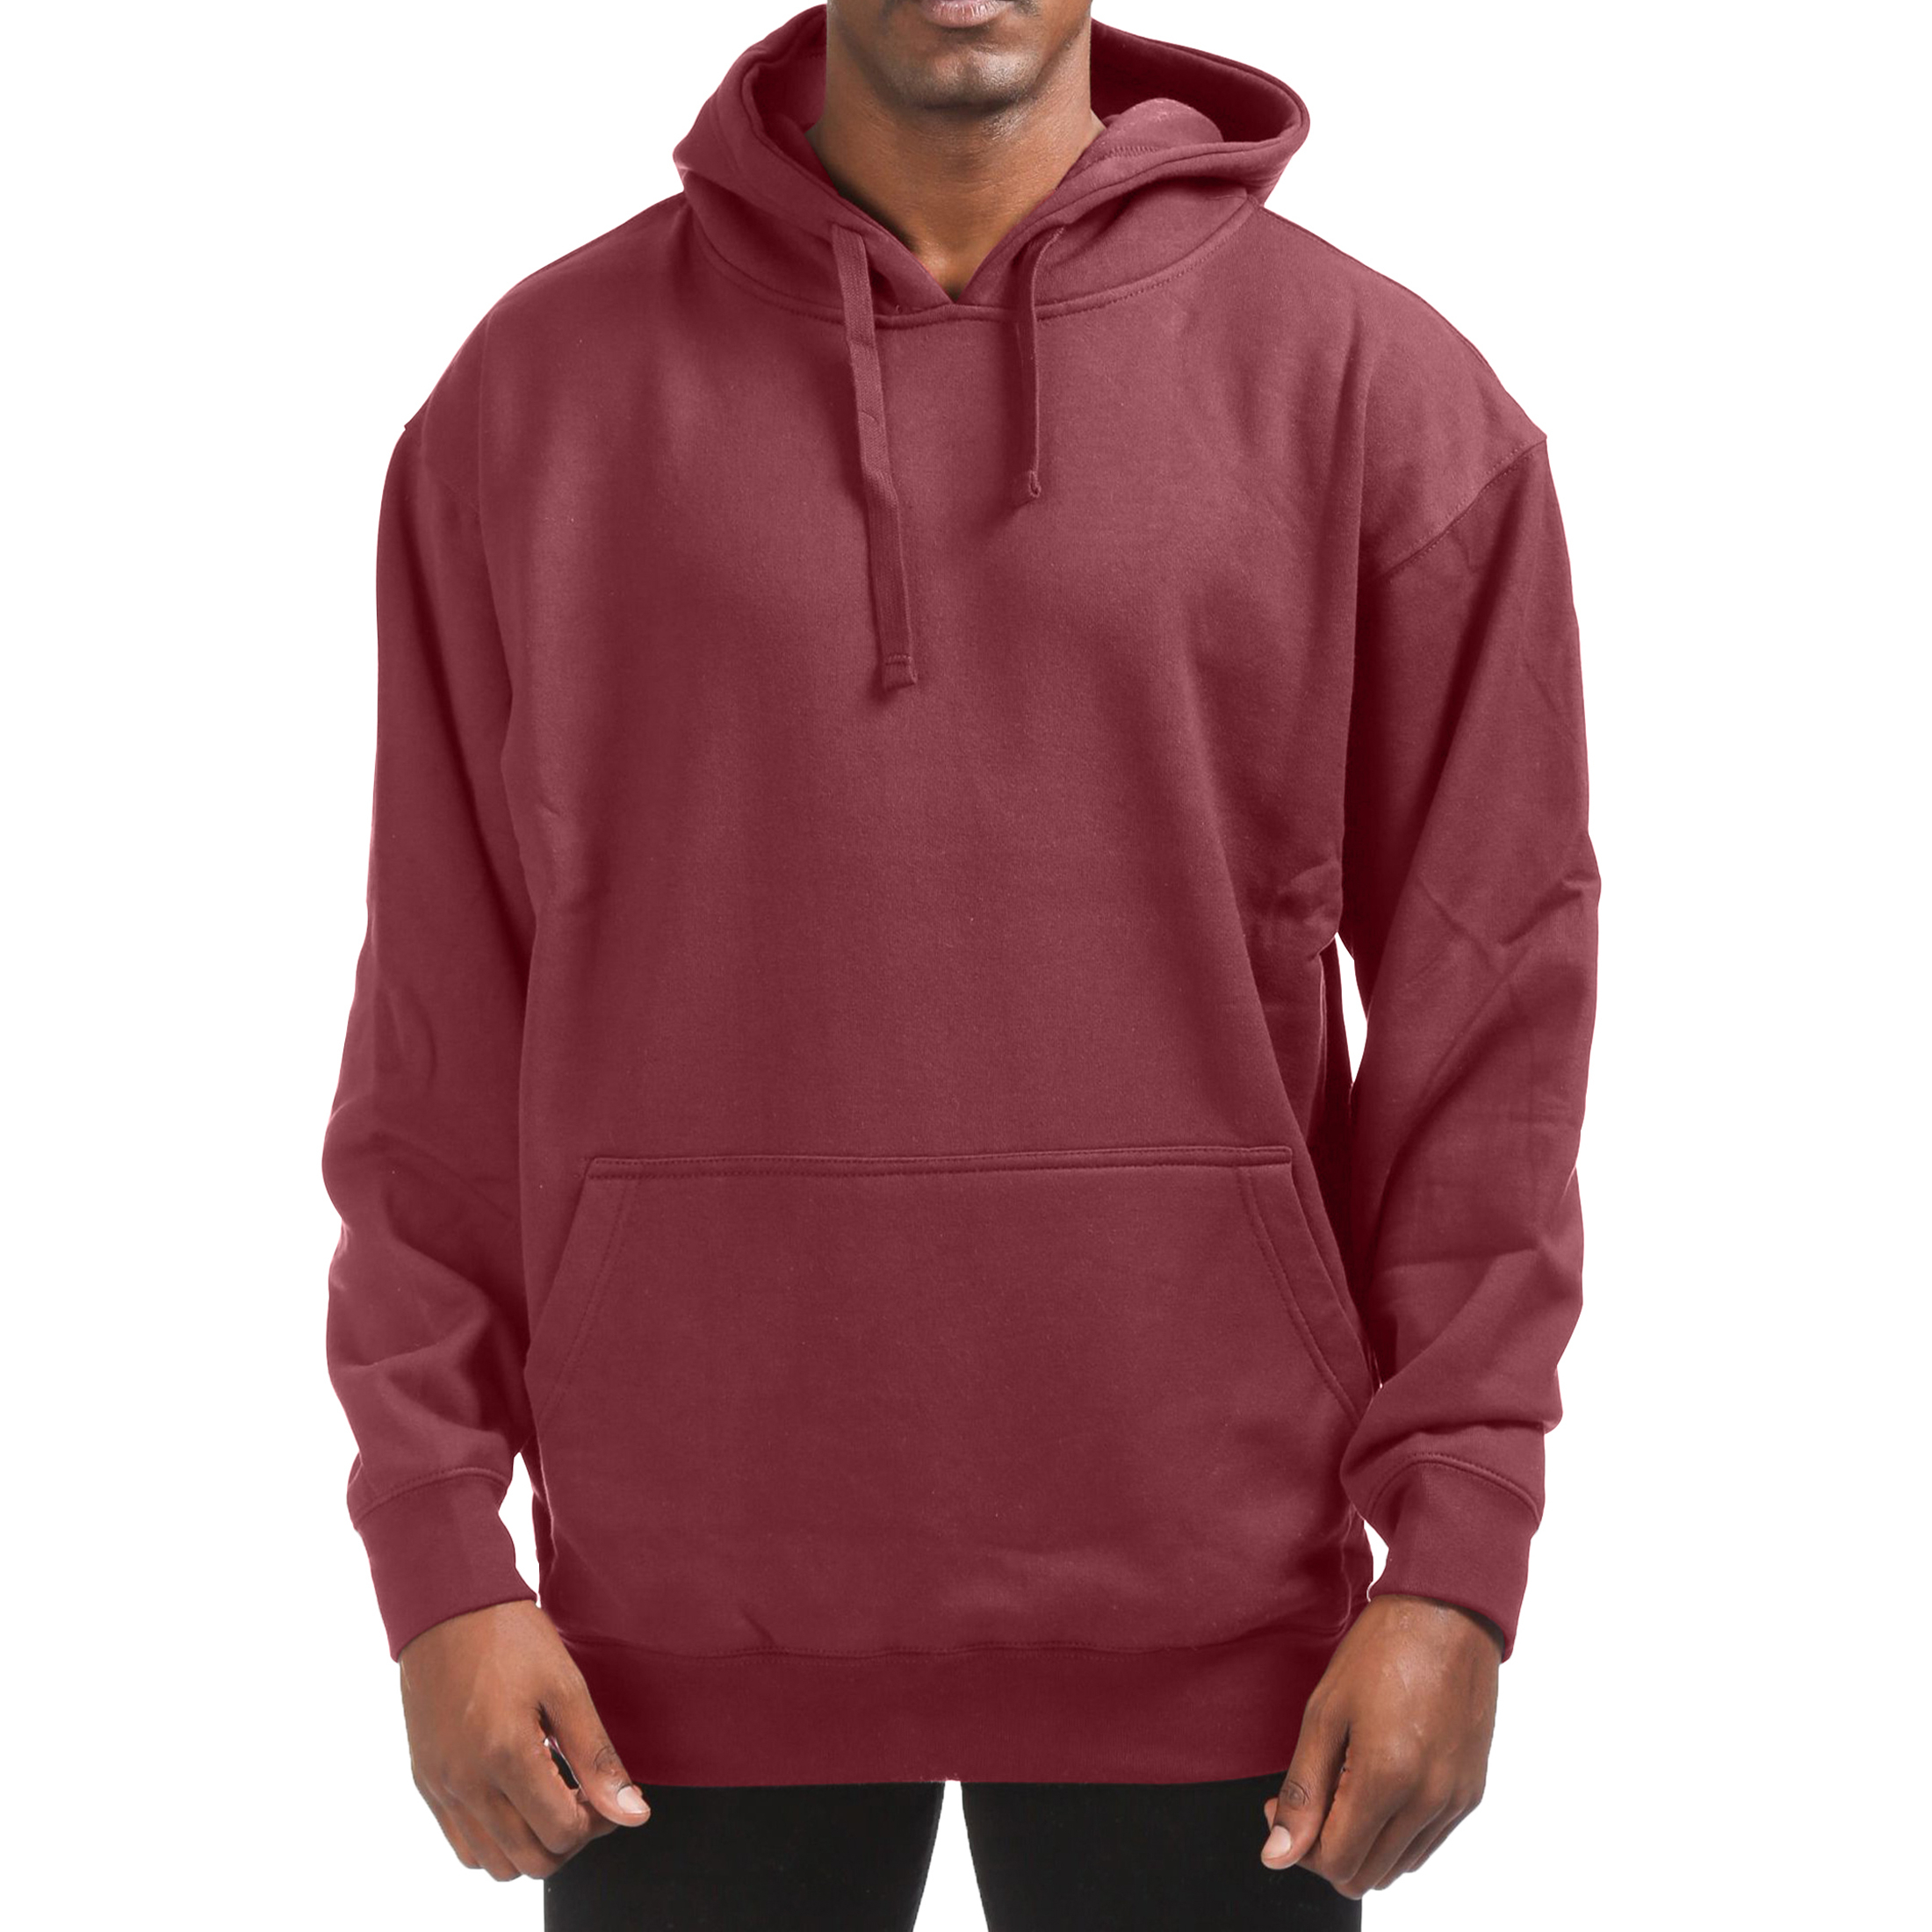 Men's Cotton-Blend Fleece Pullover Hoodie With Pocket (Big & Tall Sizes Available) - Burgundy, Small